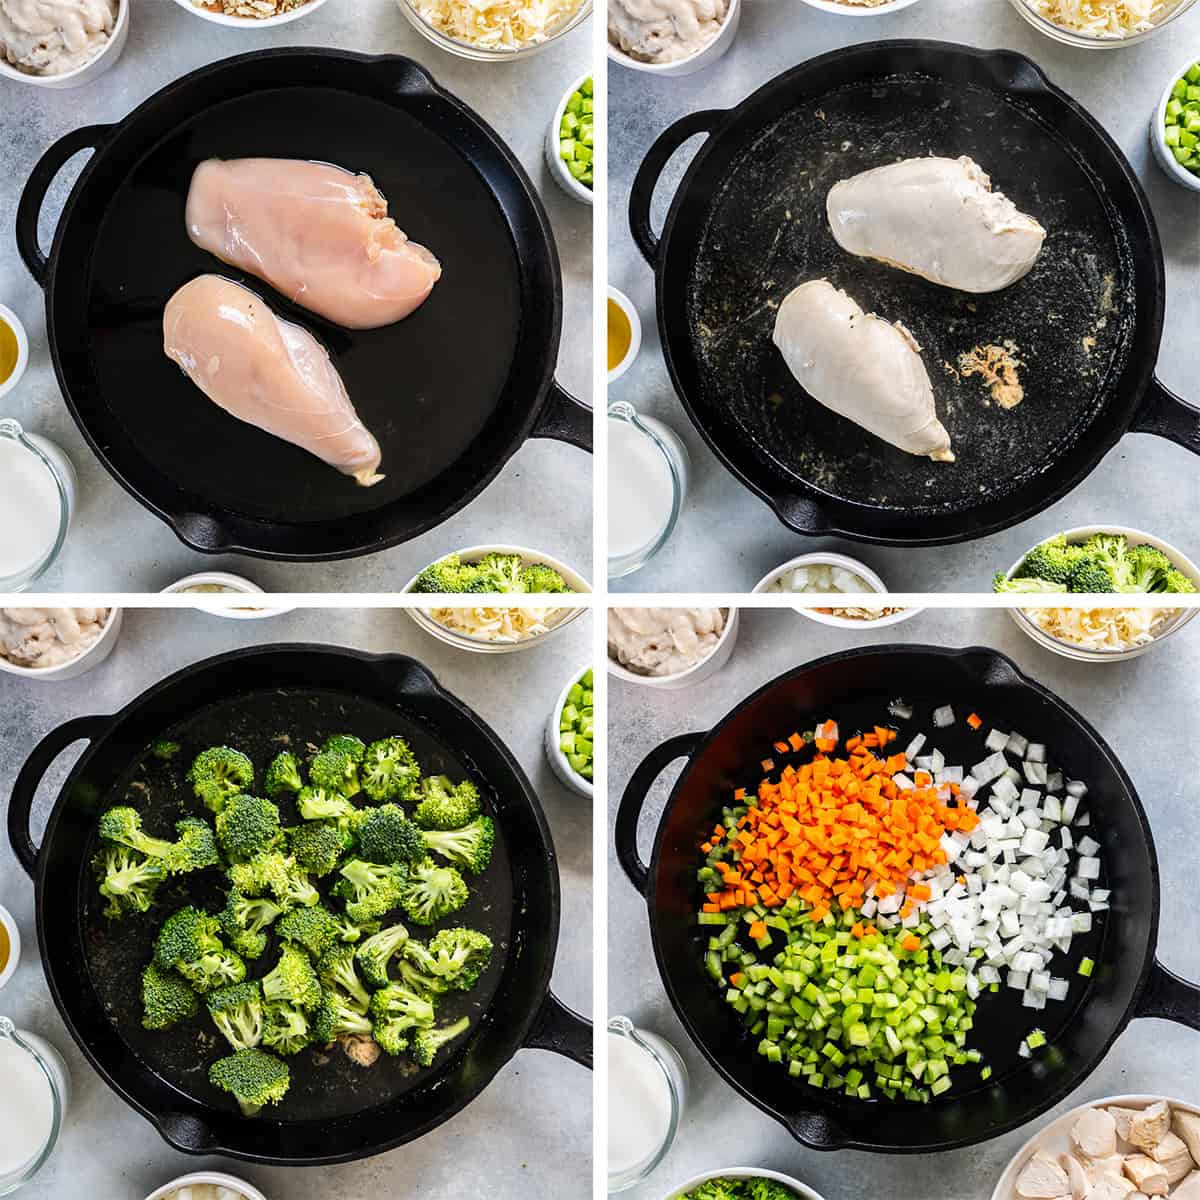 Four images of chicken, broccoli, and veggies cooking in a cast iron skillet.